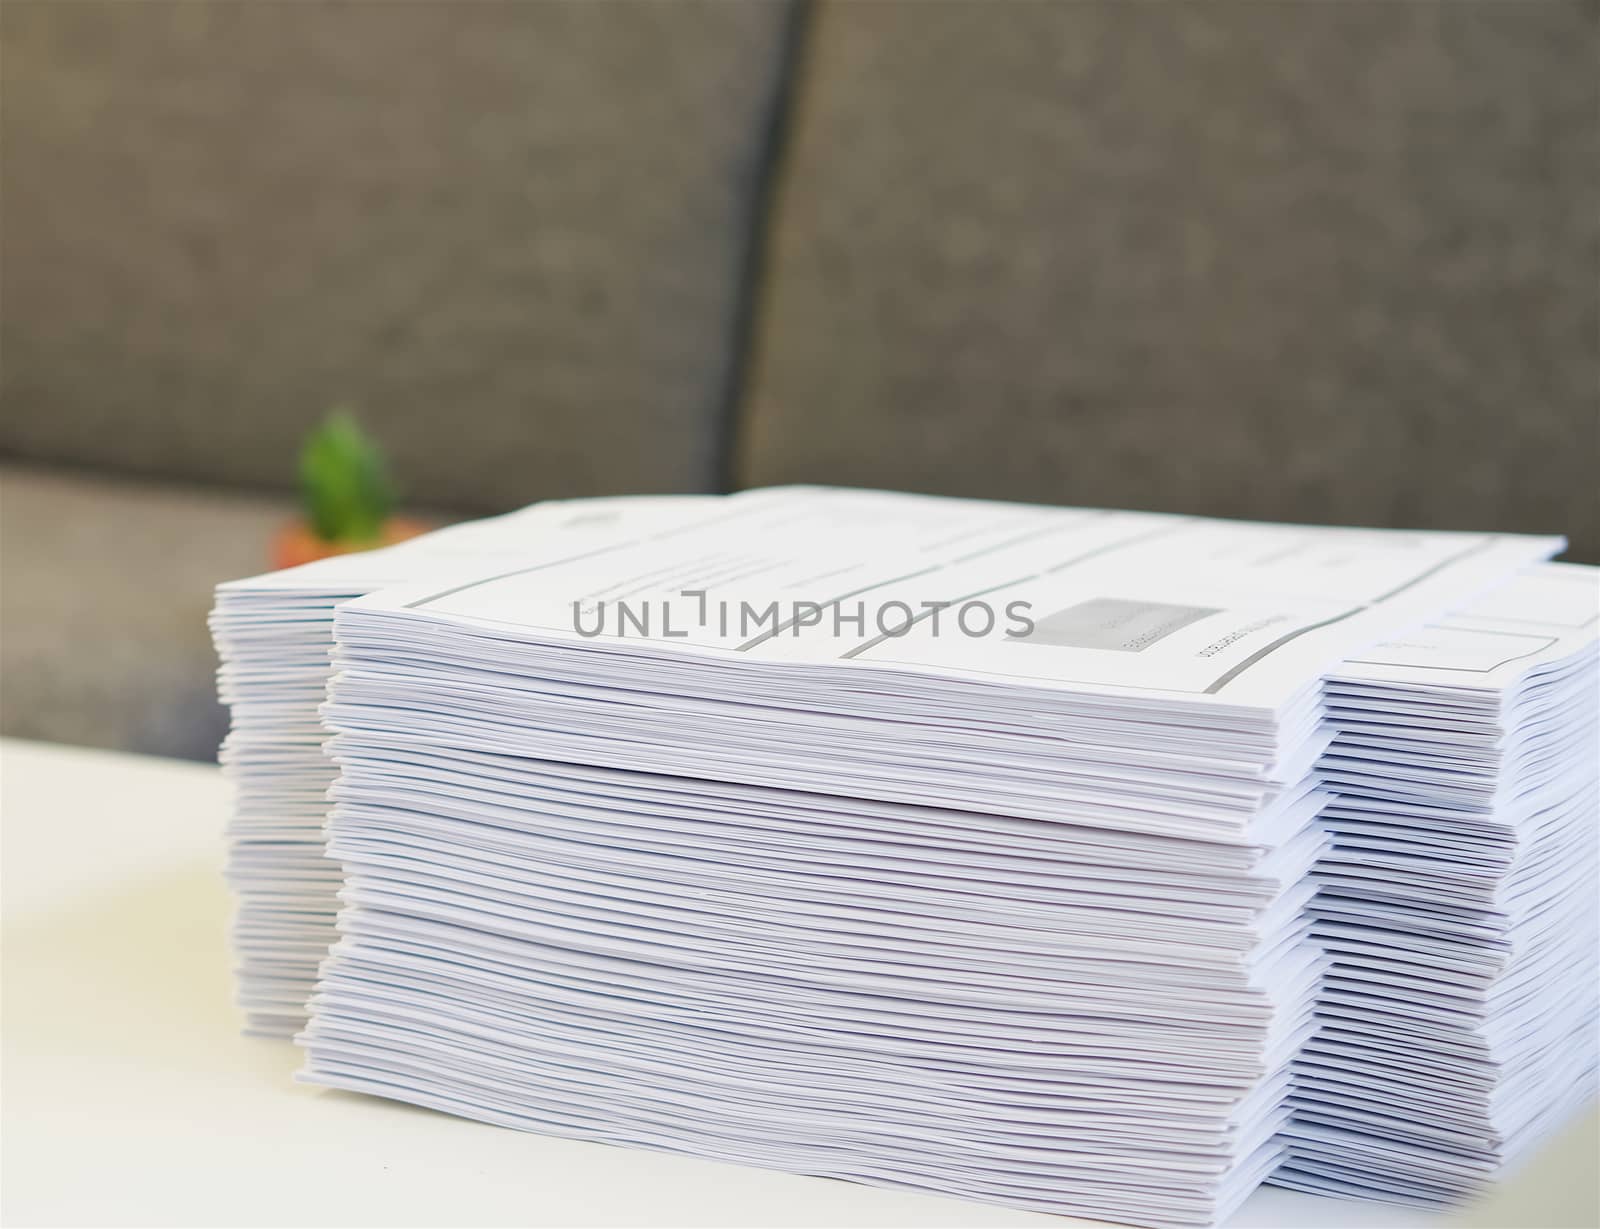 Stack of paper was put on table at office environment.